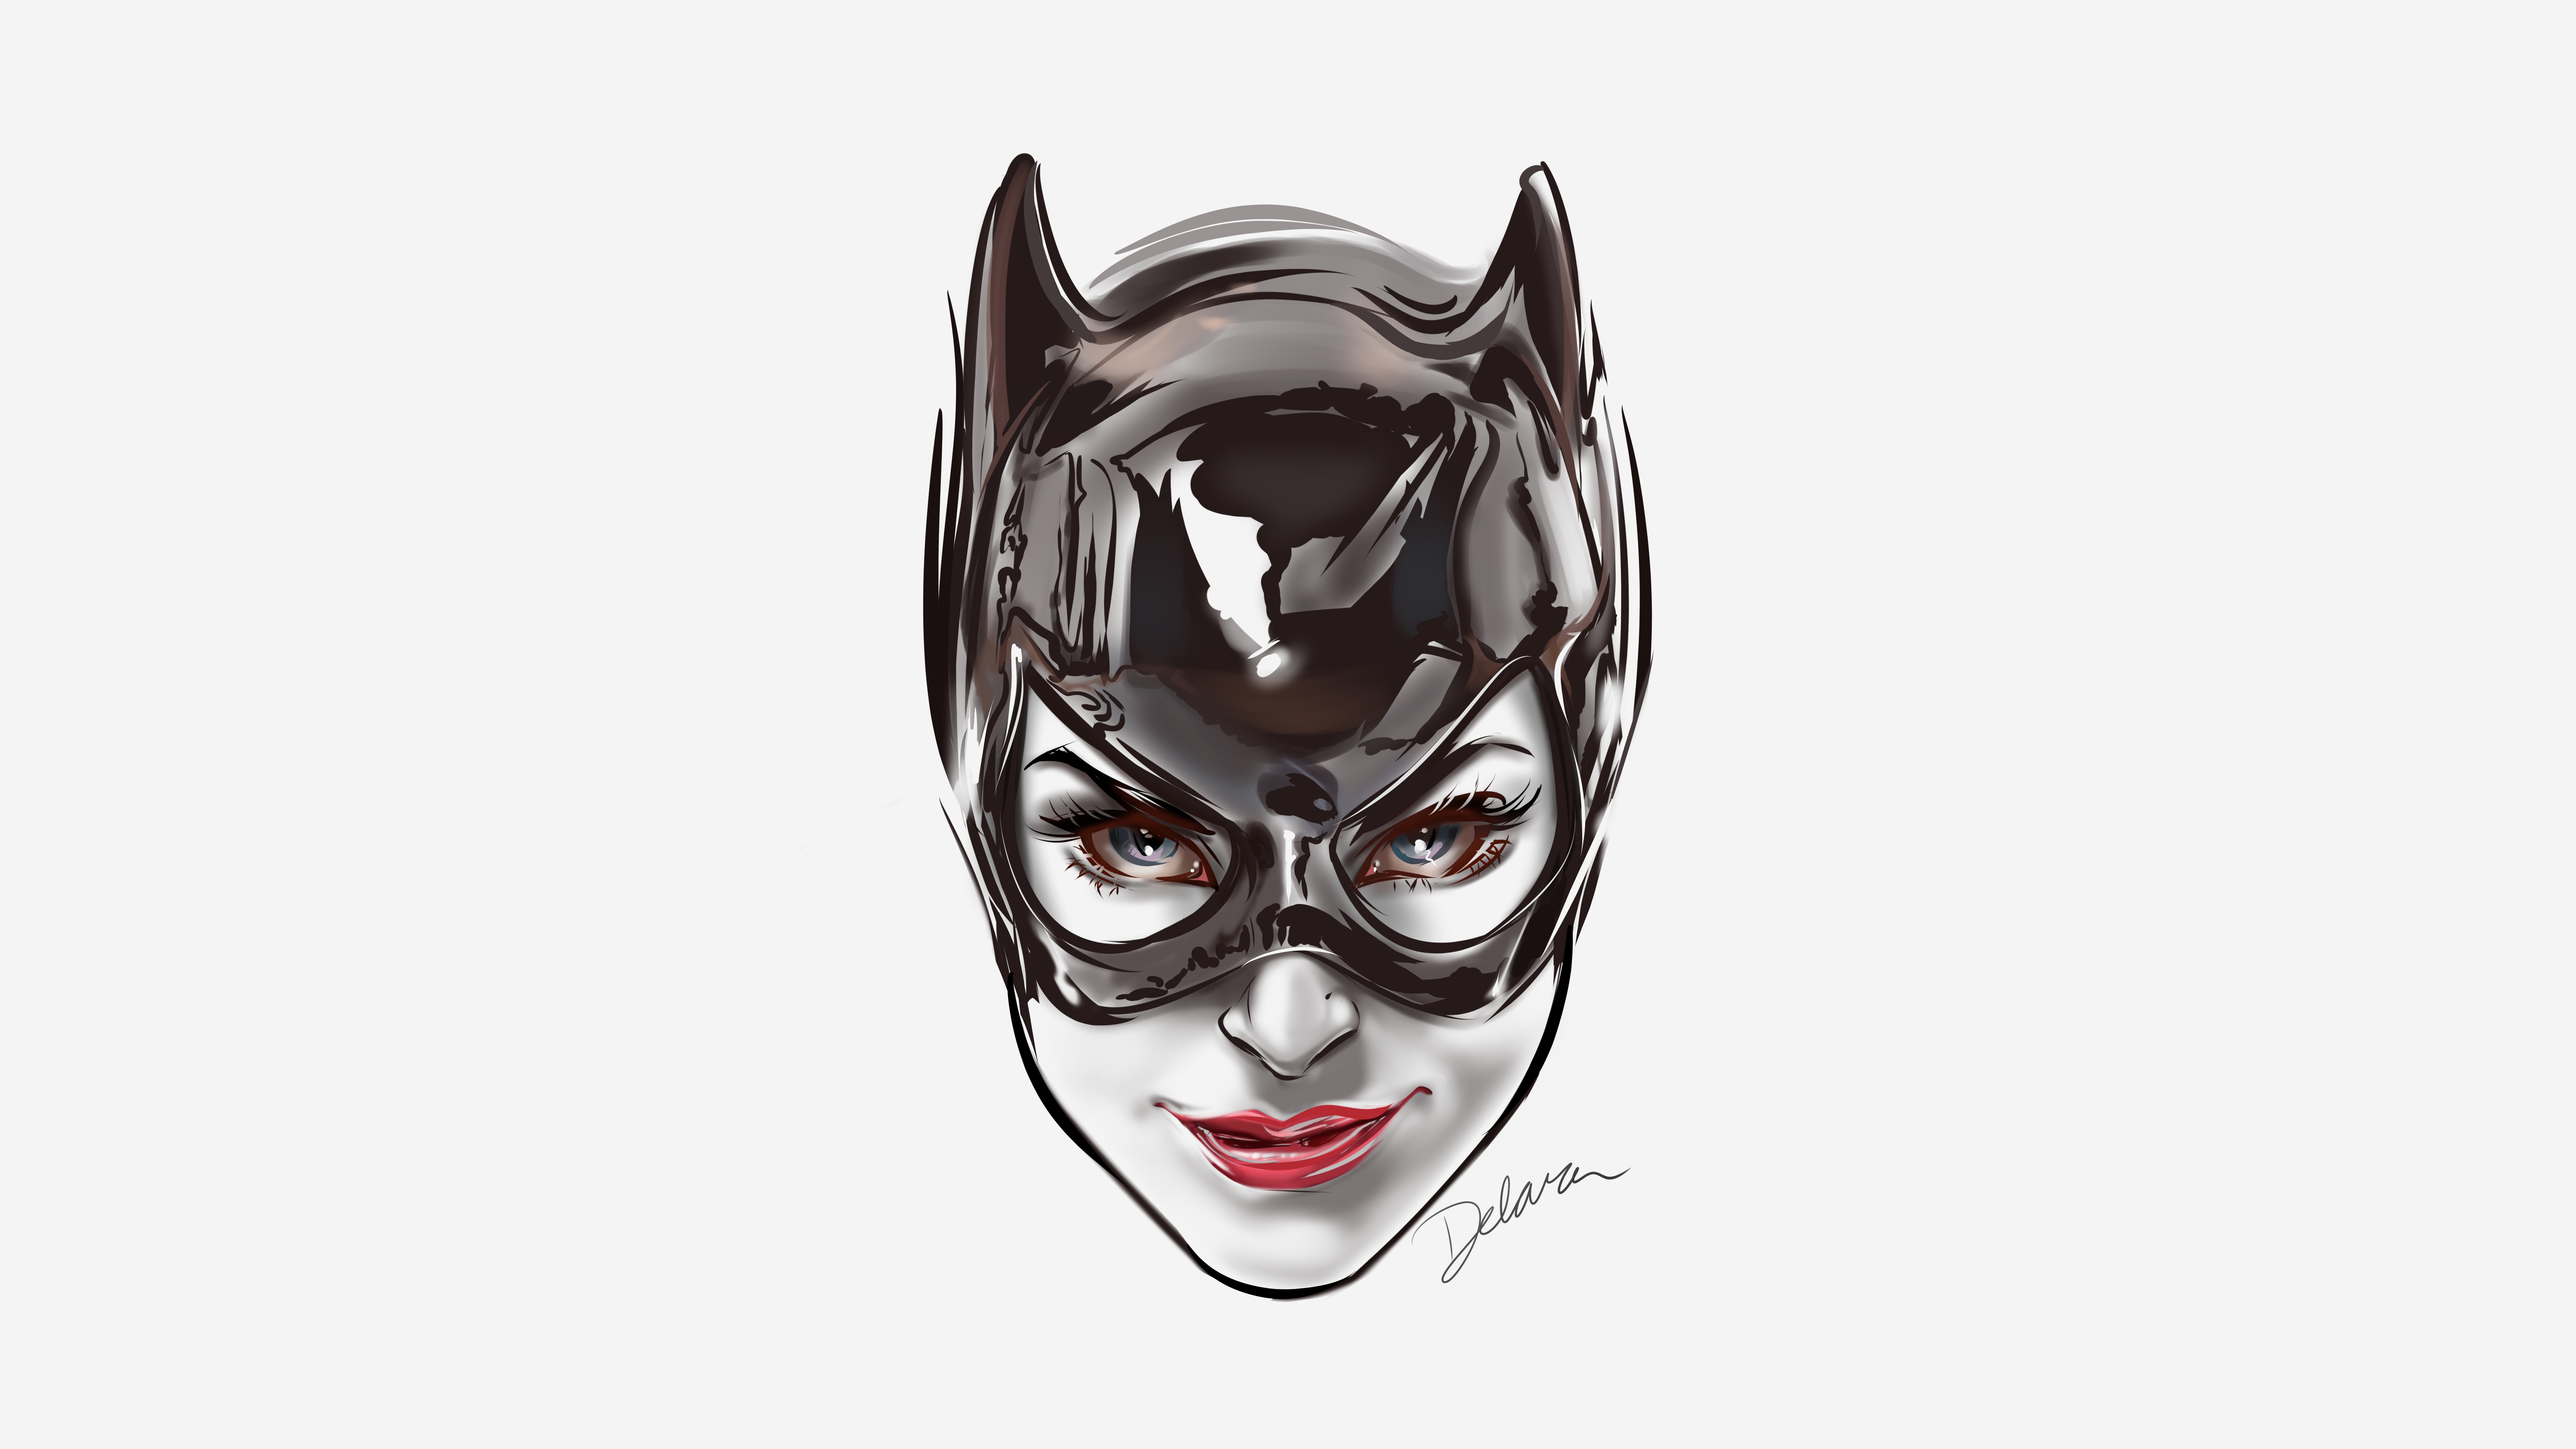 Wallpapers Catwoman the face Batman on the desktop